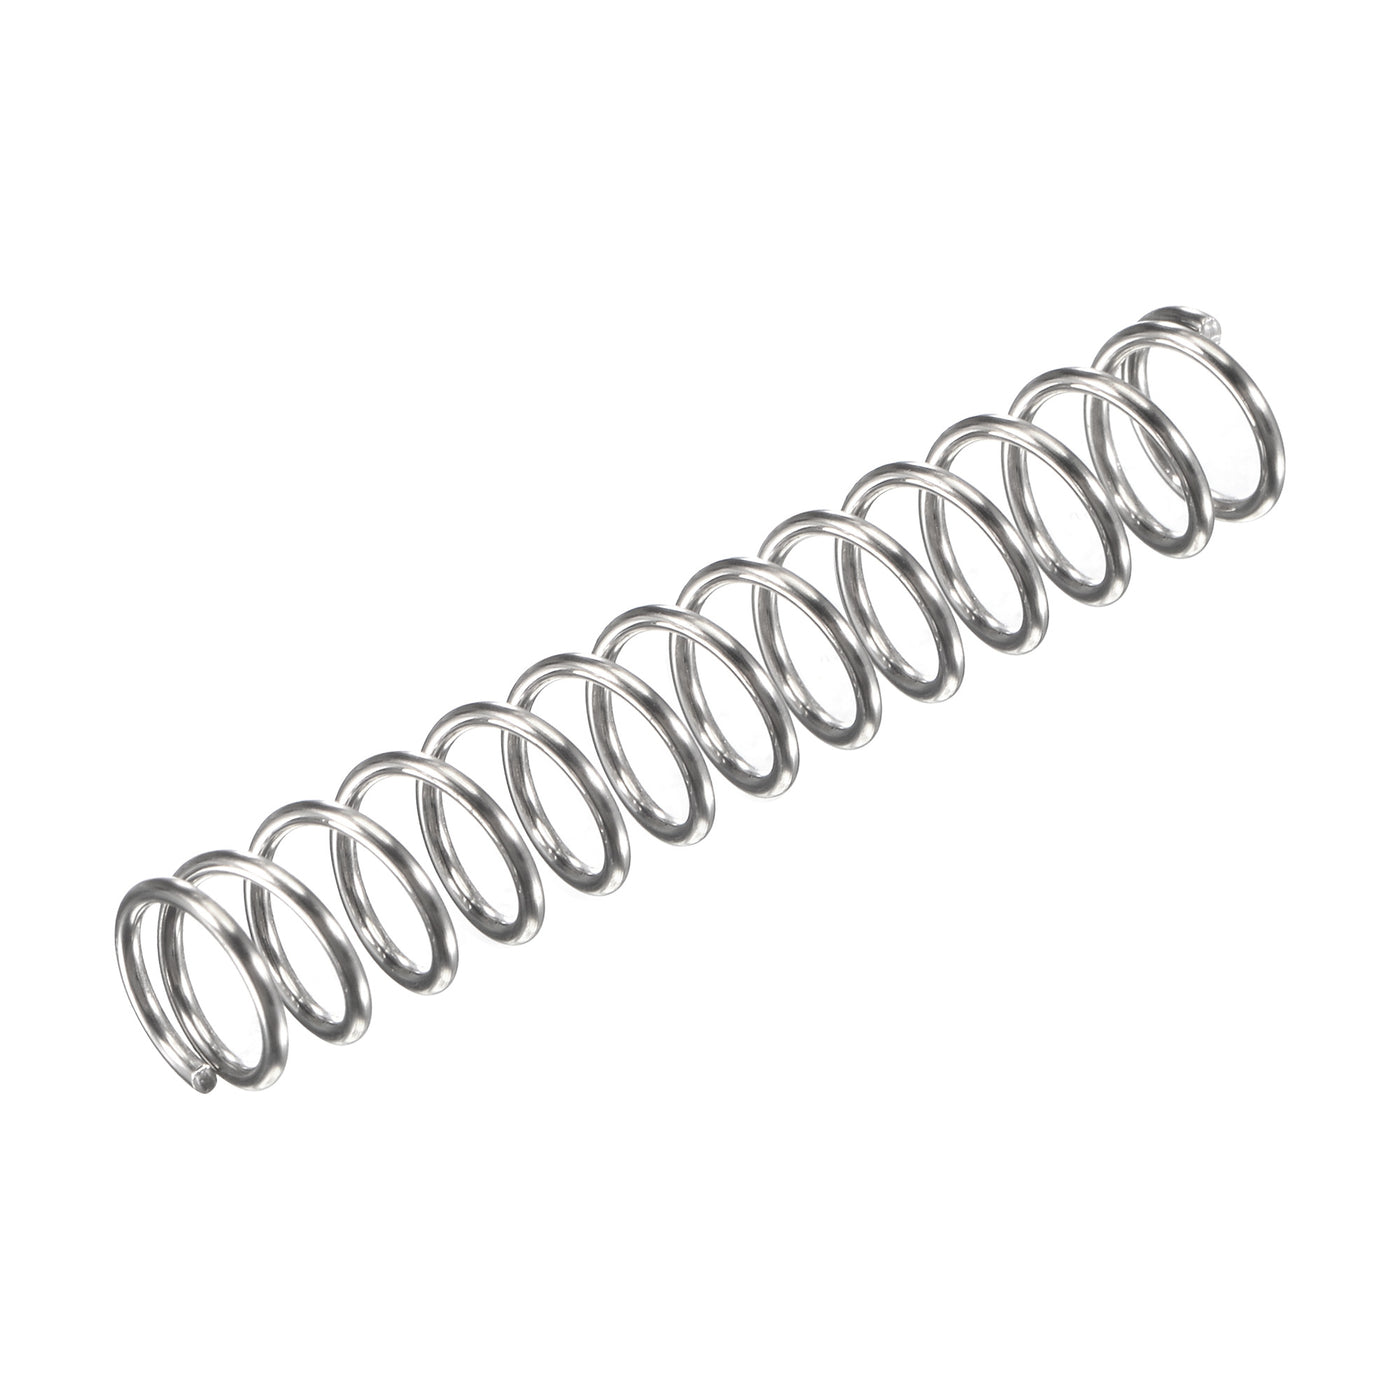 uxcell Uxcell 7mmx0.8mmx35mm 304 Stainless Steel Compression Spring 17.2N Load Capacity 30pcs